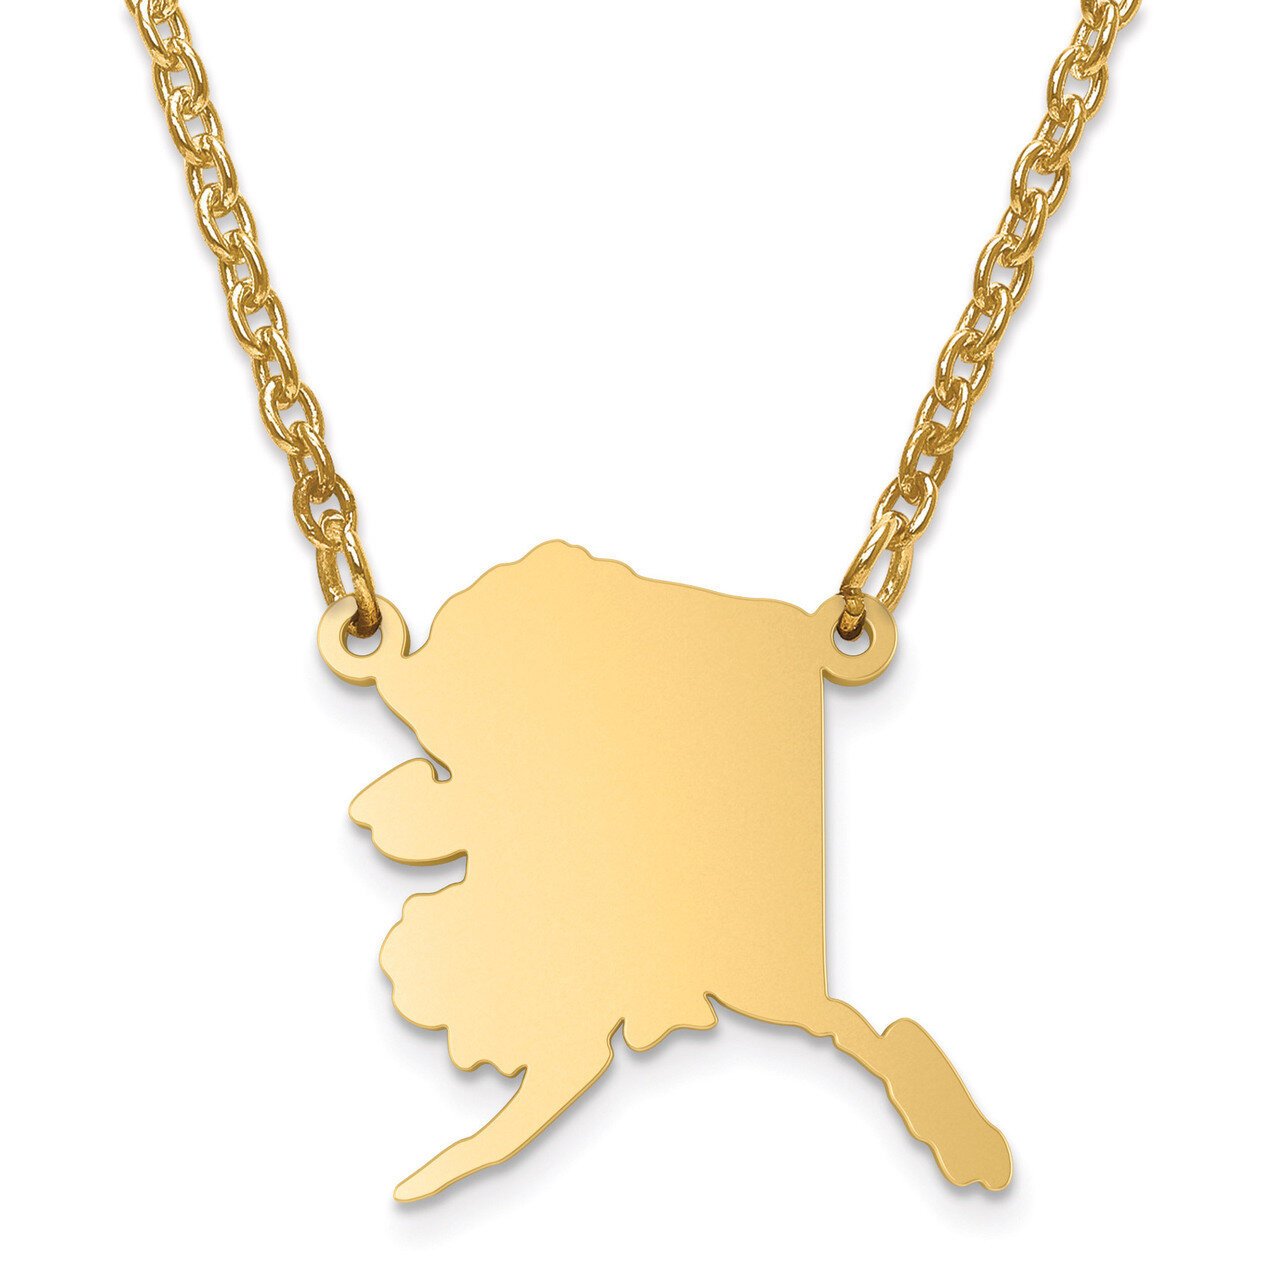 Alaska State Pendant with Chain Engravable Gold-plated on Sterling Silver